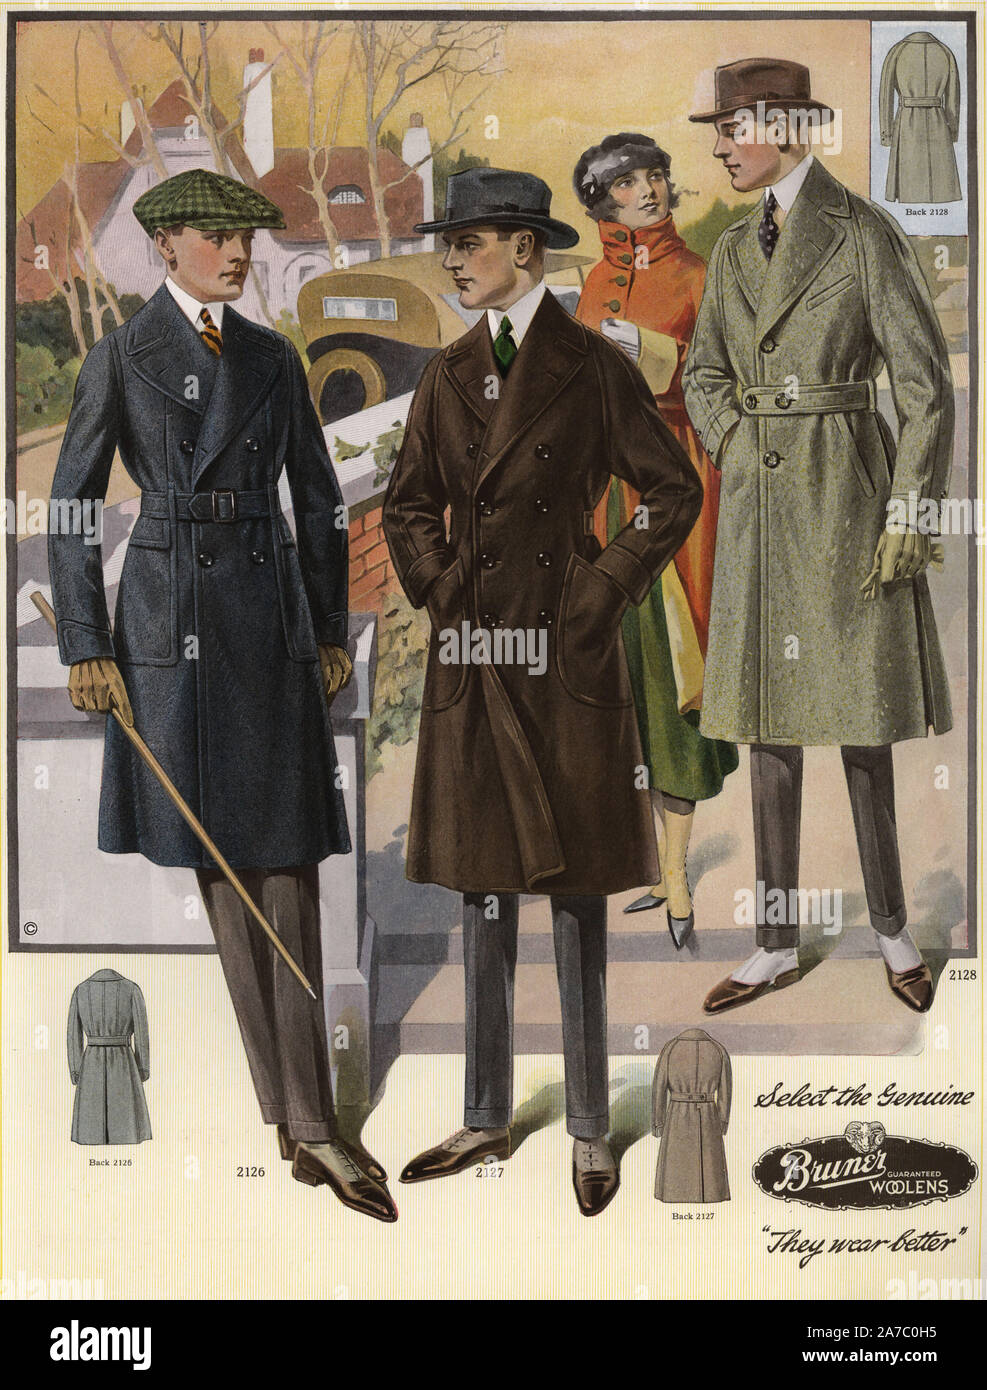 Men in Raglan and Ulsterette coats, with cloth caps, gloves, canes and spats. Chromolithograph from a catalog of male winter fashions from Bruner Woolens, 1920. Stock Photo